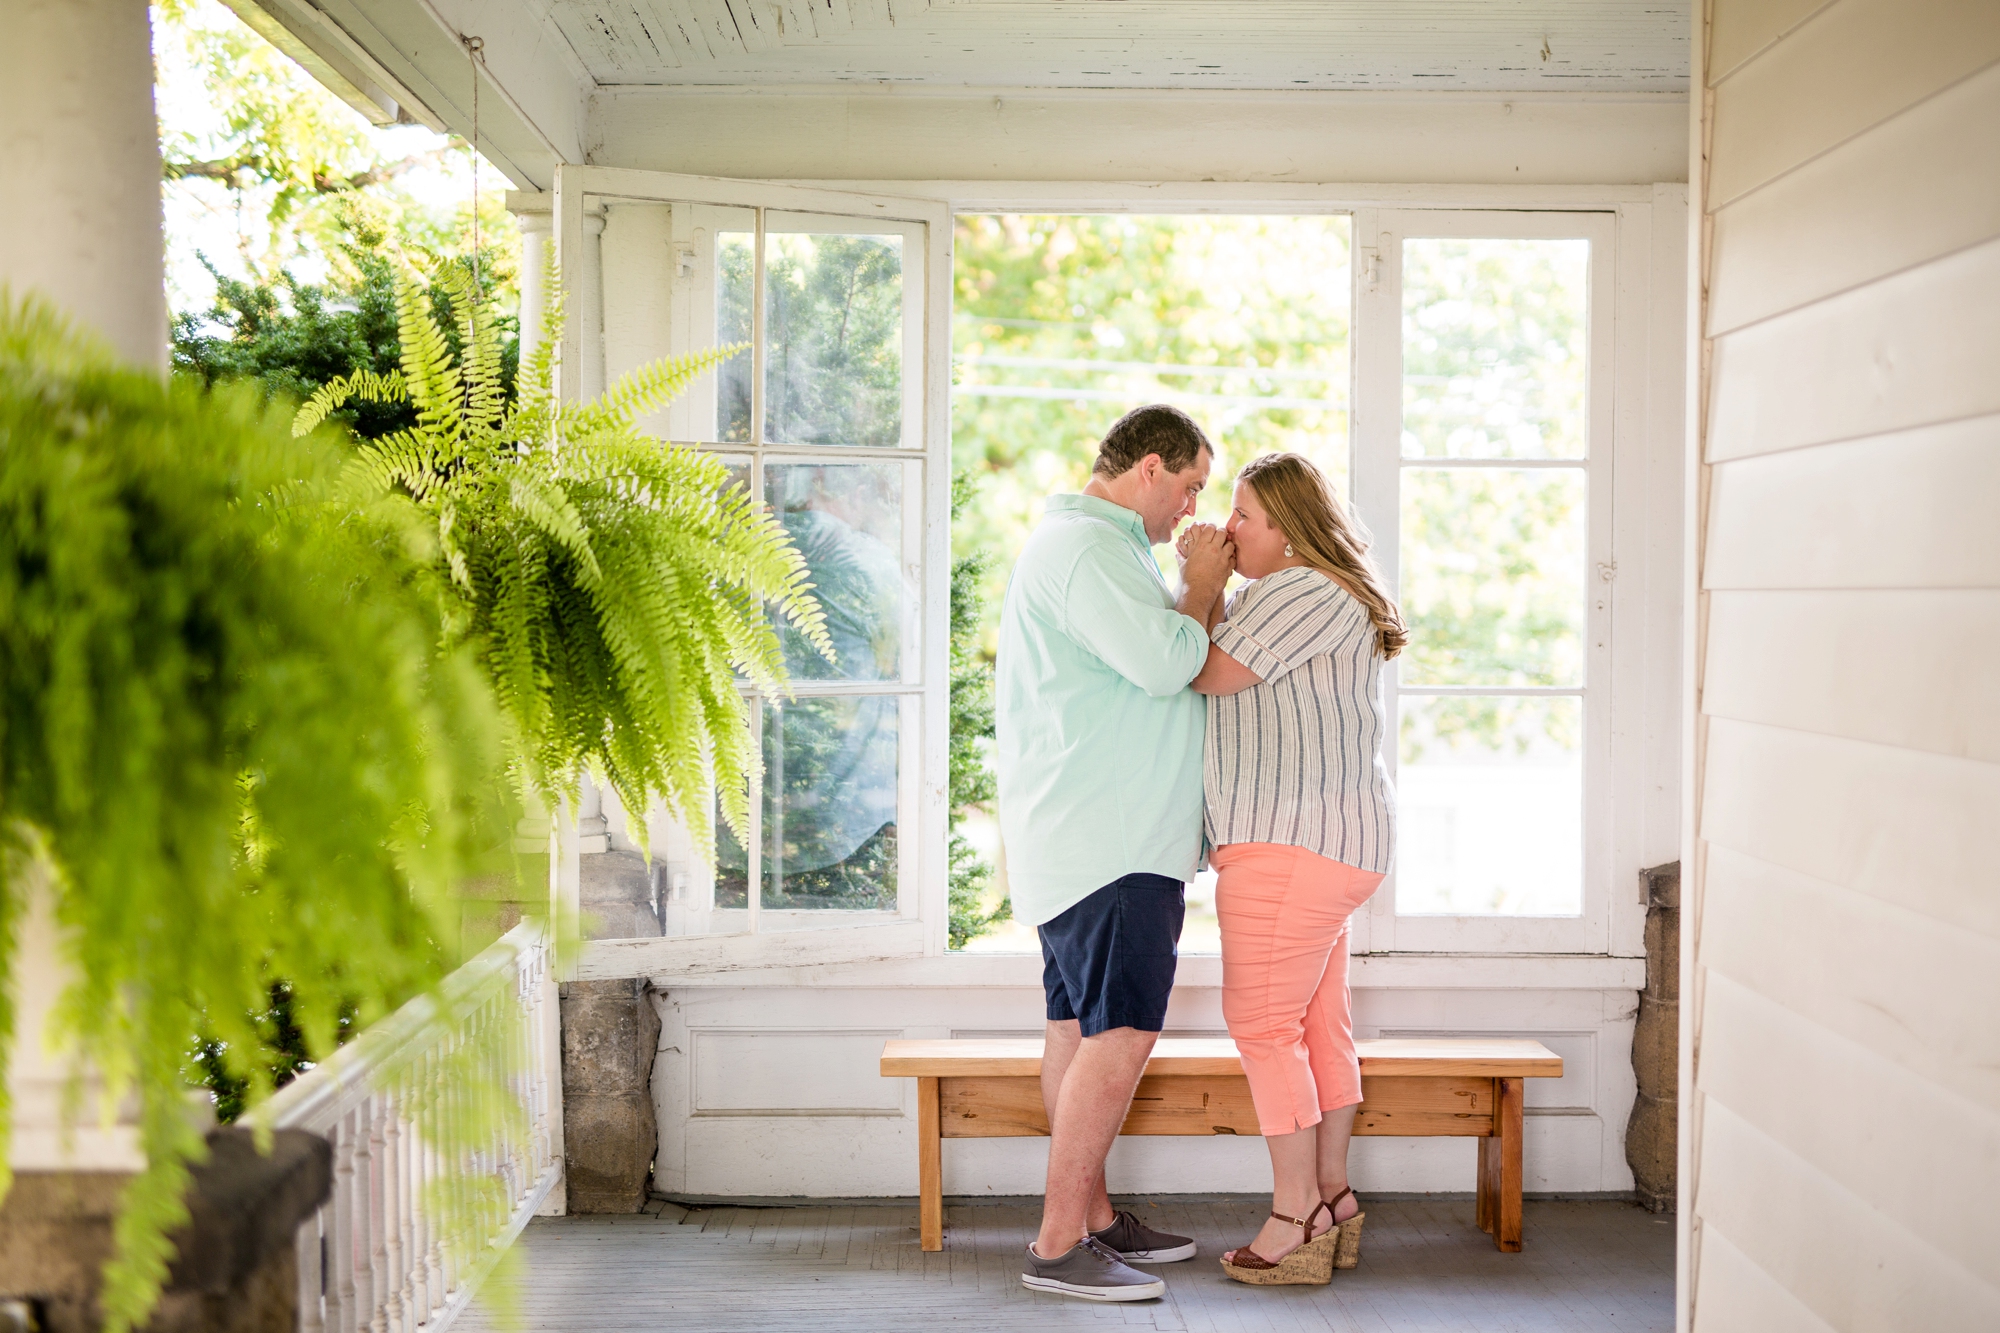 westminster college wedding pictures, westminster college wedding photos, westminster college engagement photos, westminster college engagement pictures, westminster college chapel